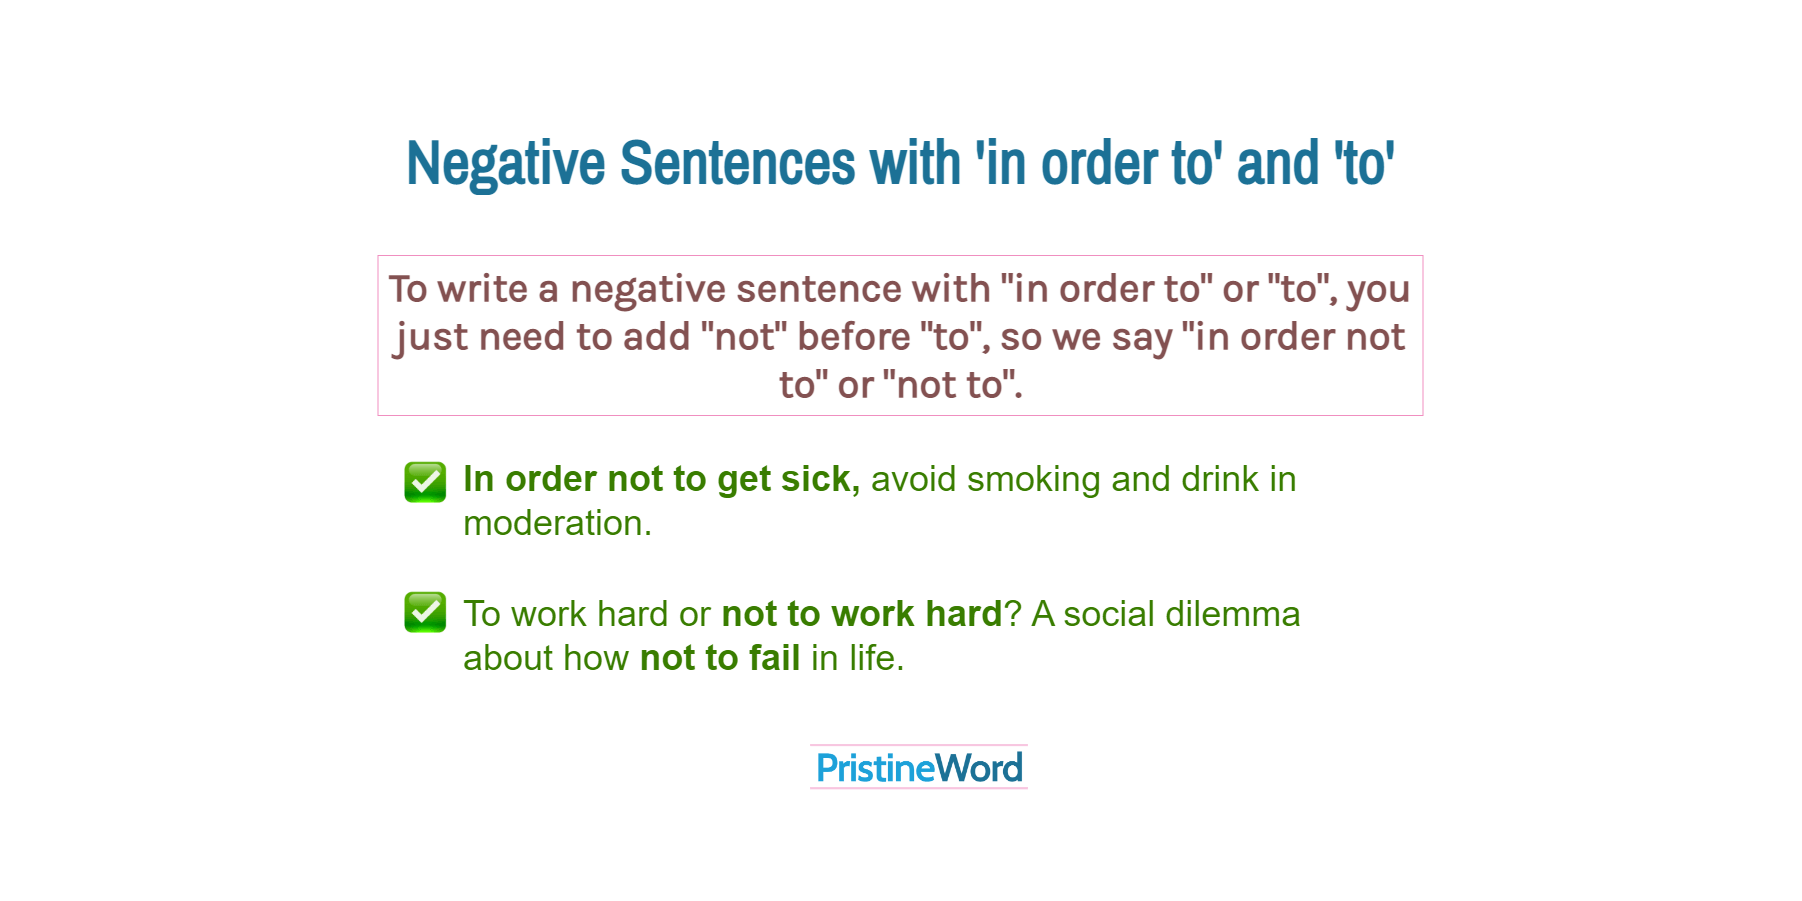 Negative Sentences with 'In order to' and 'To'